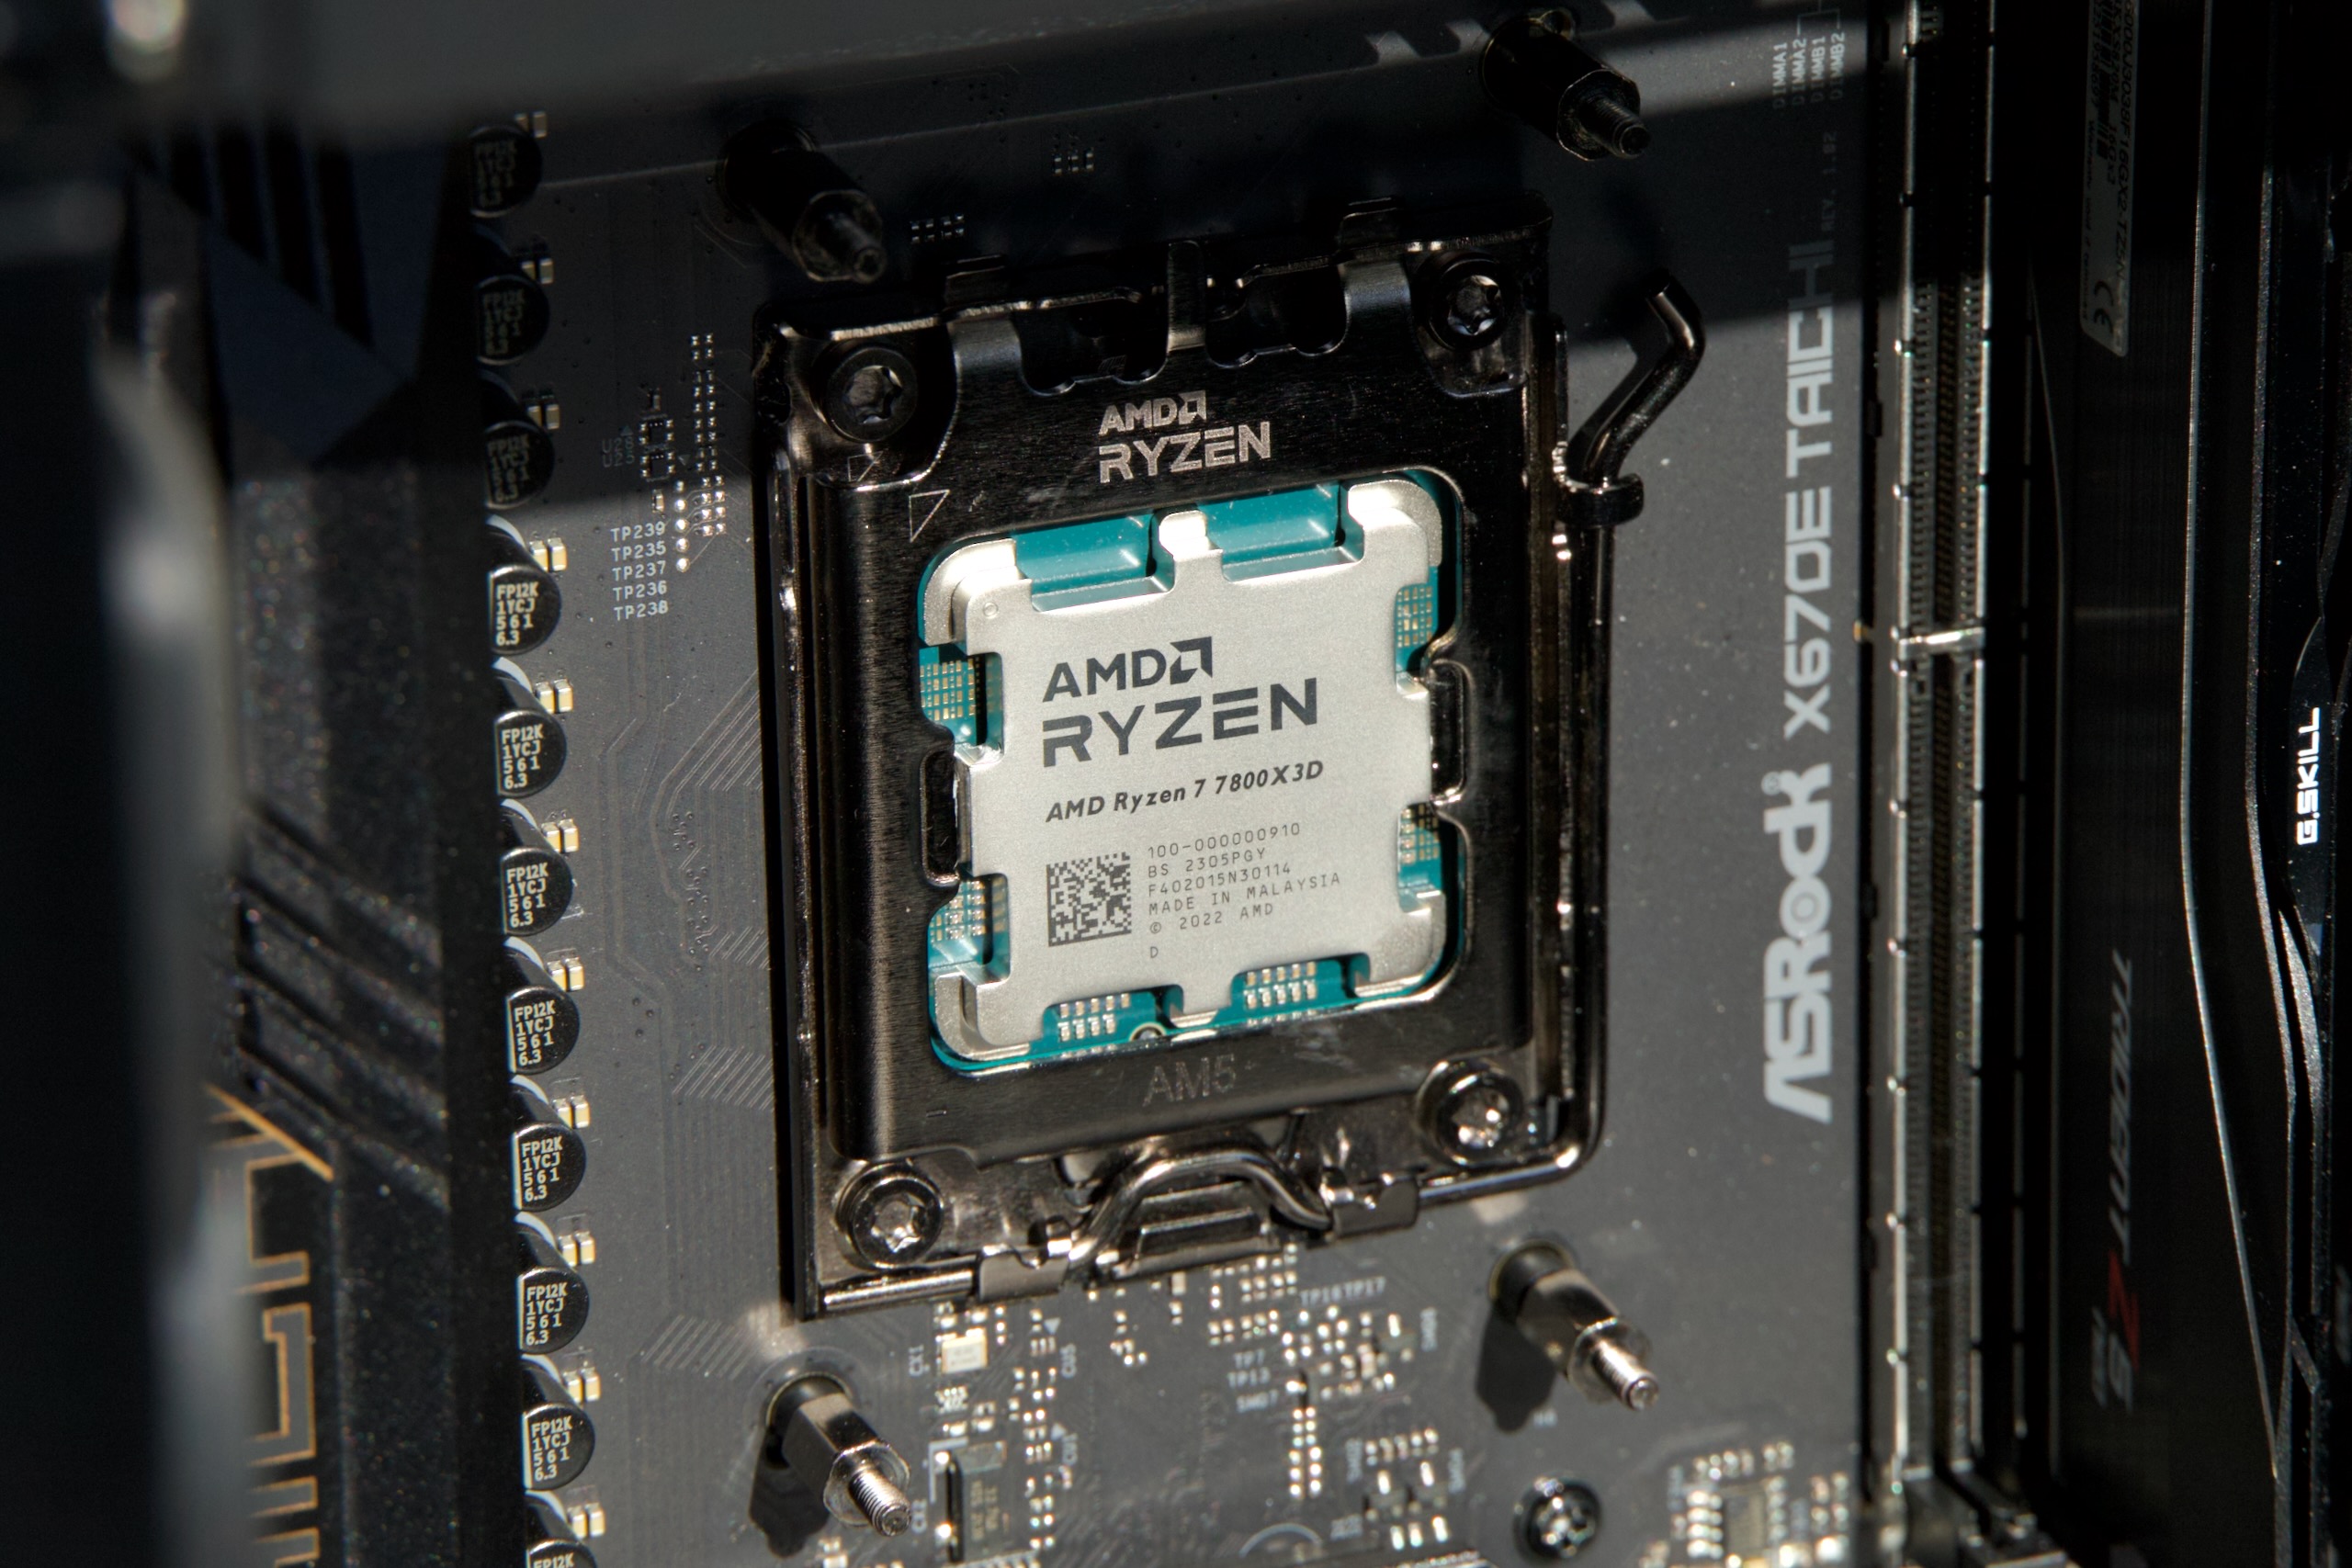 AMD Ryzen 7 7800X3D Review - The CPU For The Gamers! 